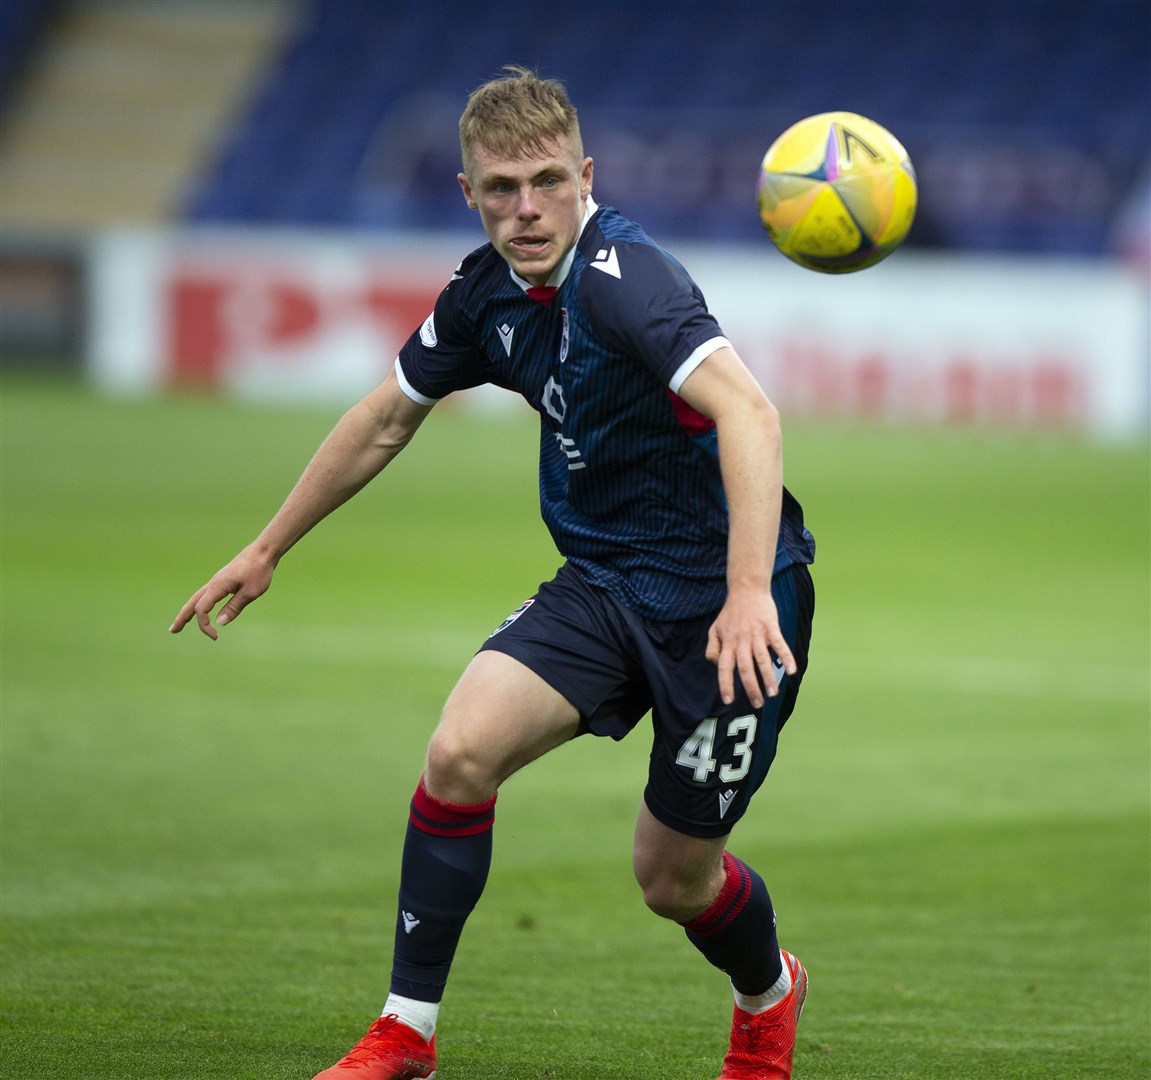 Josh Reid has been called up for the Scotland Under-19 squad.